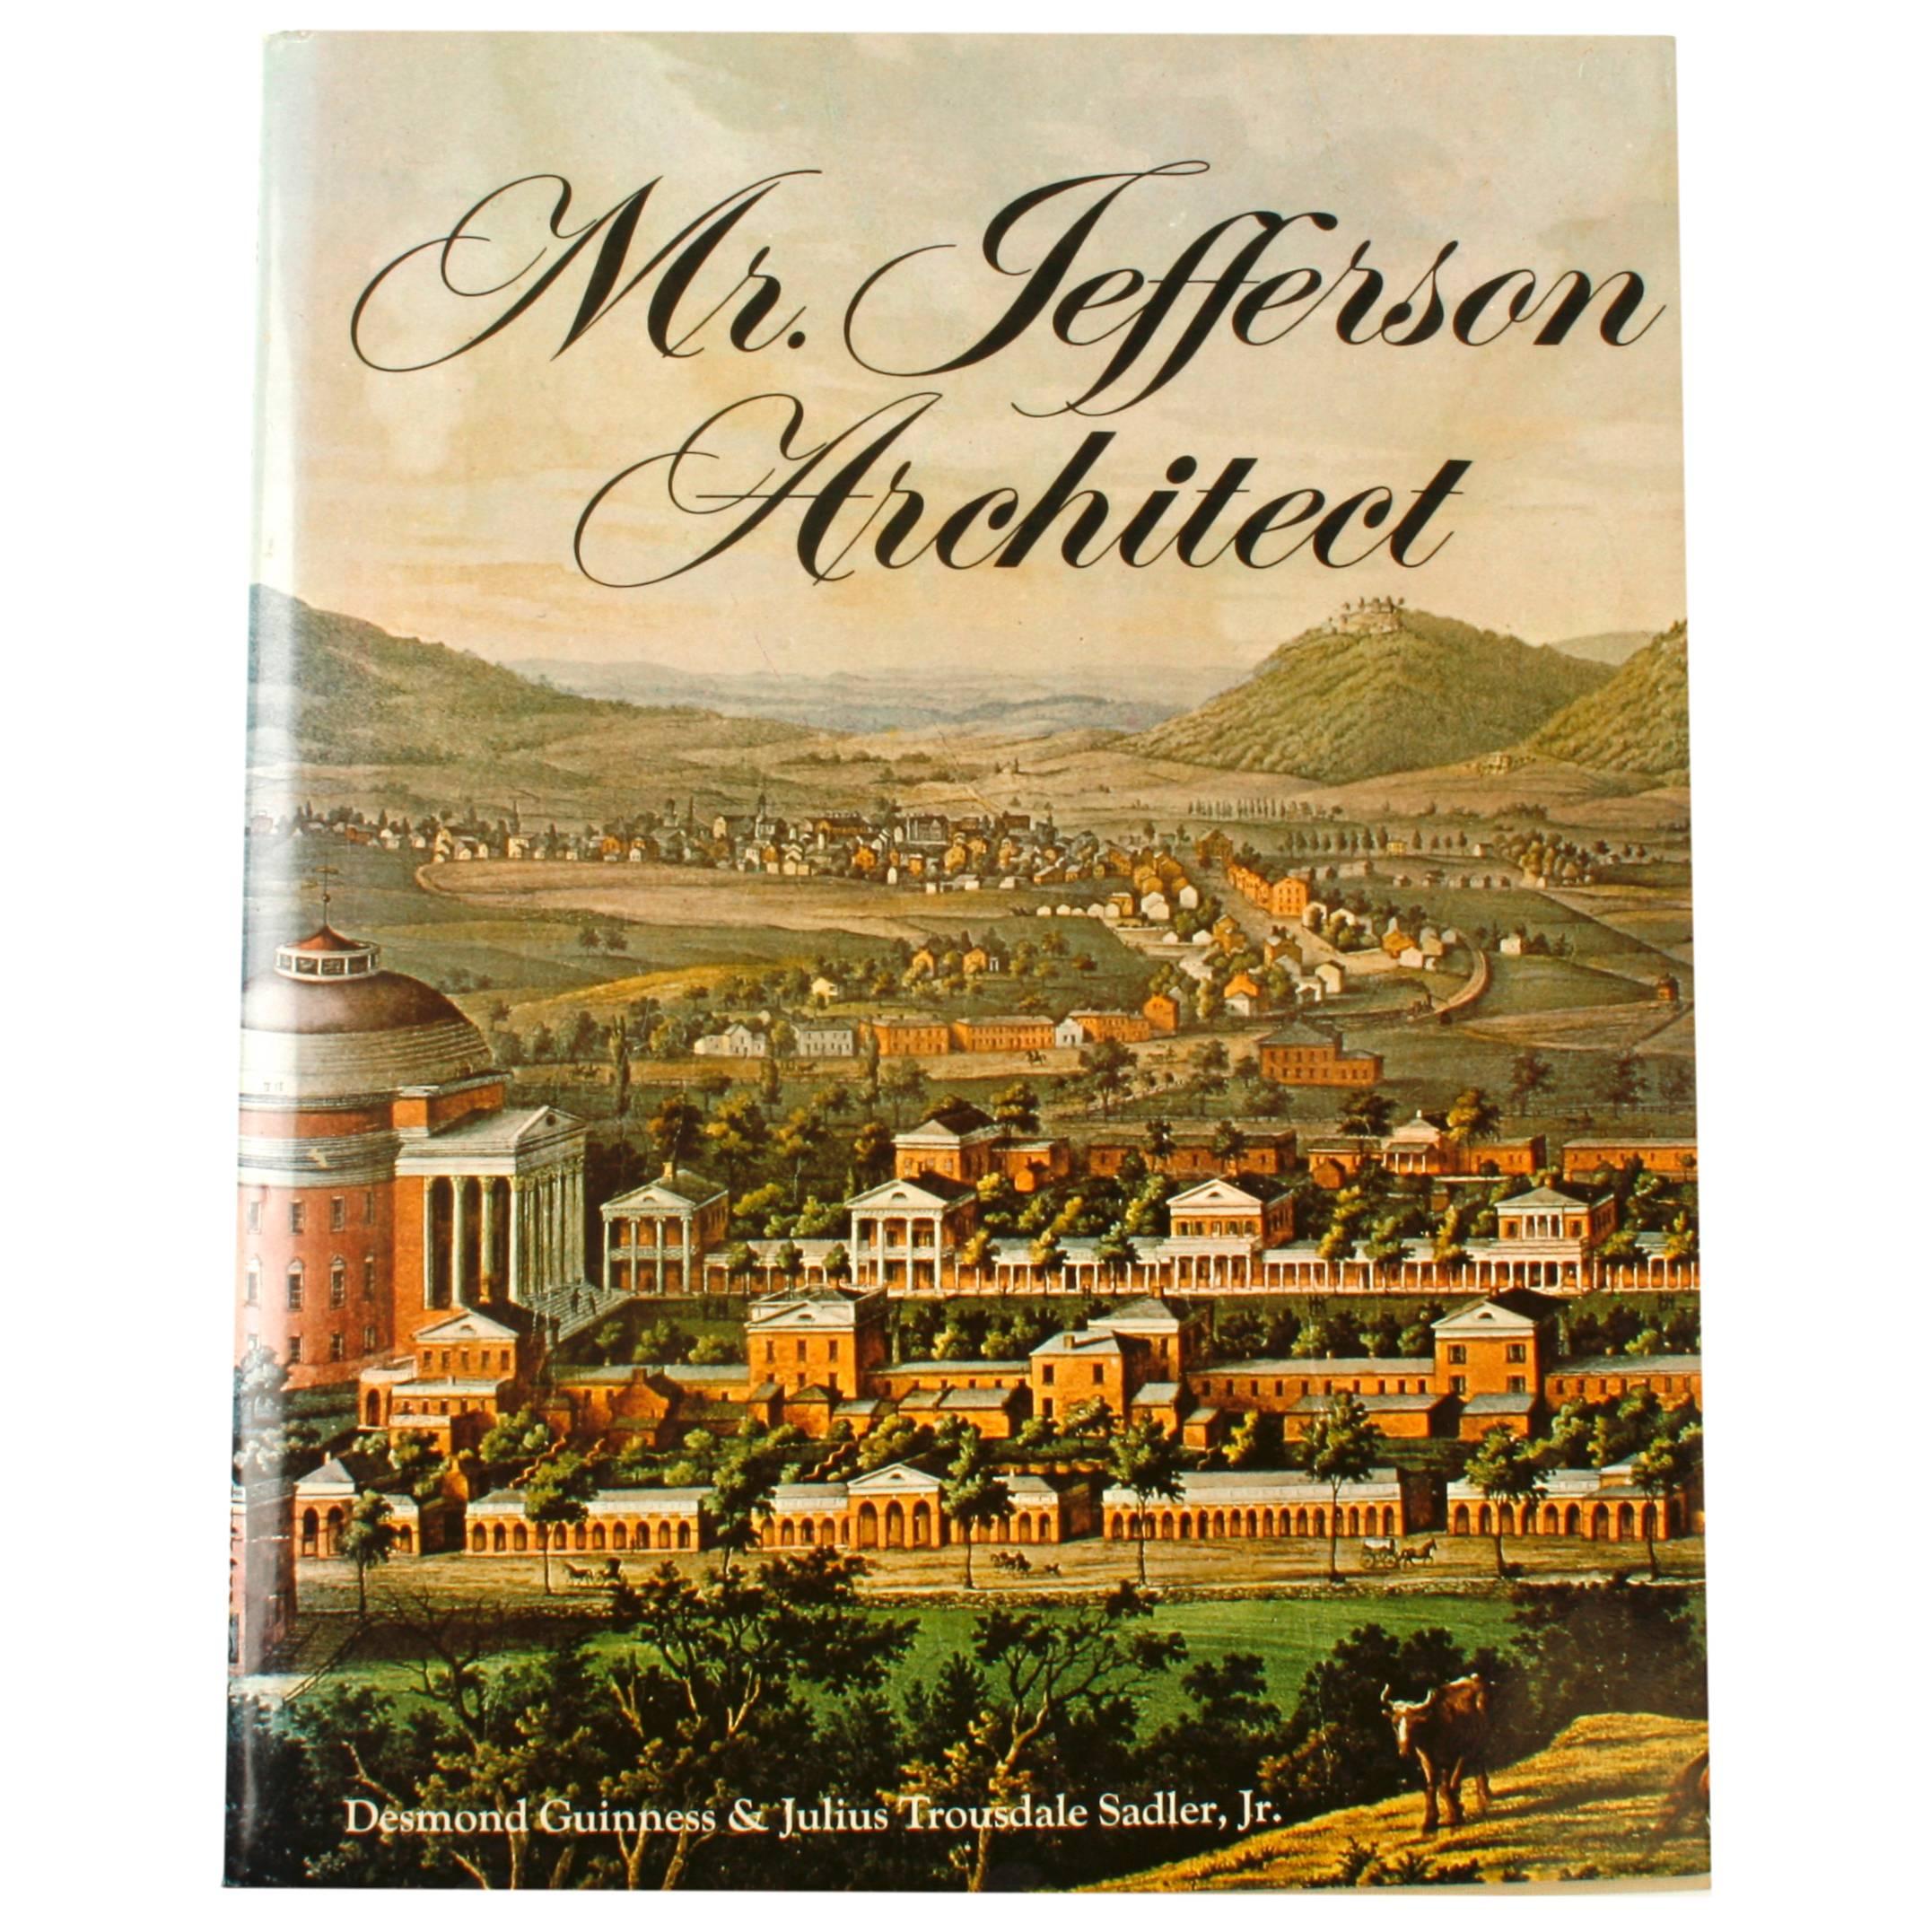 Mr. Jefferson Architecture, 1st Edition, Inscribed by the Author